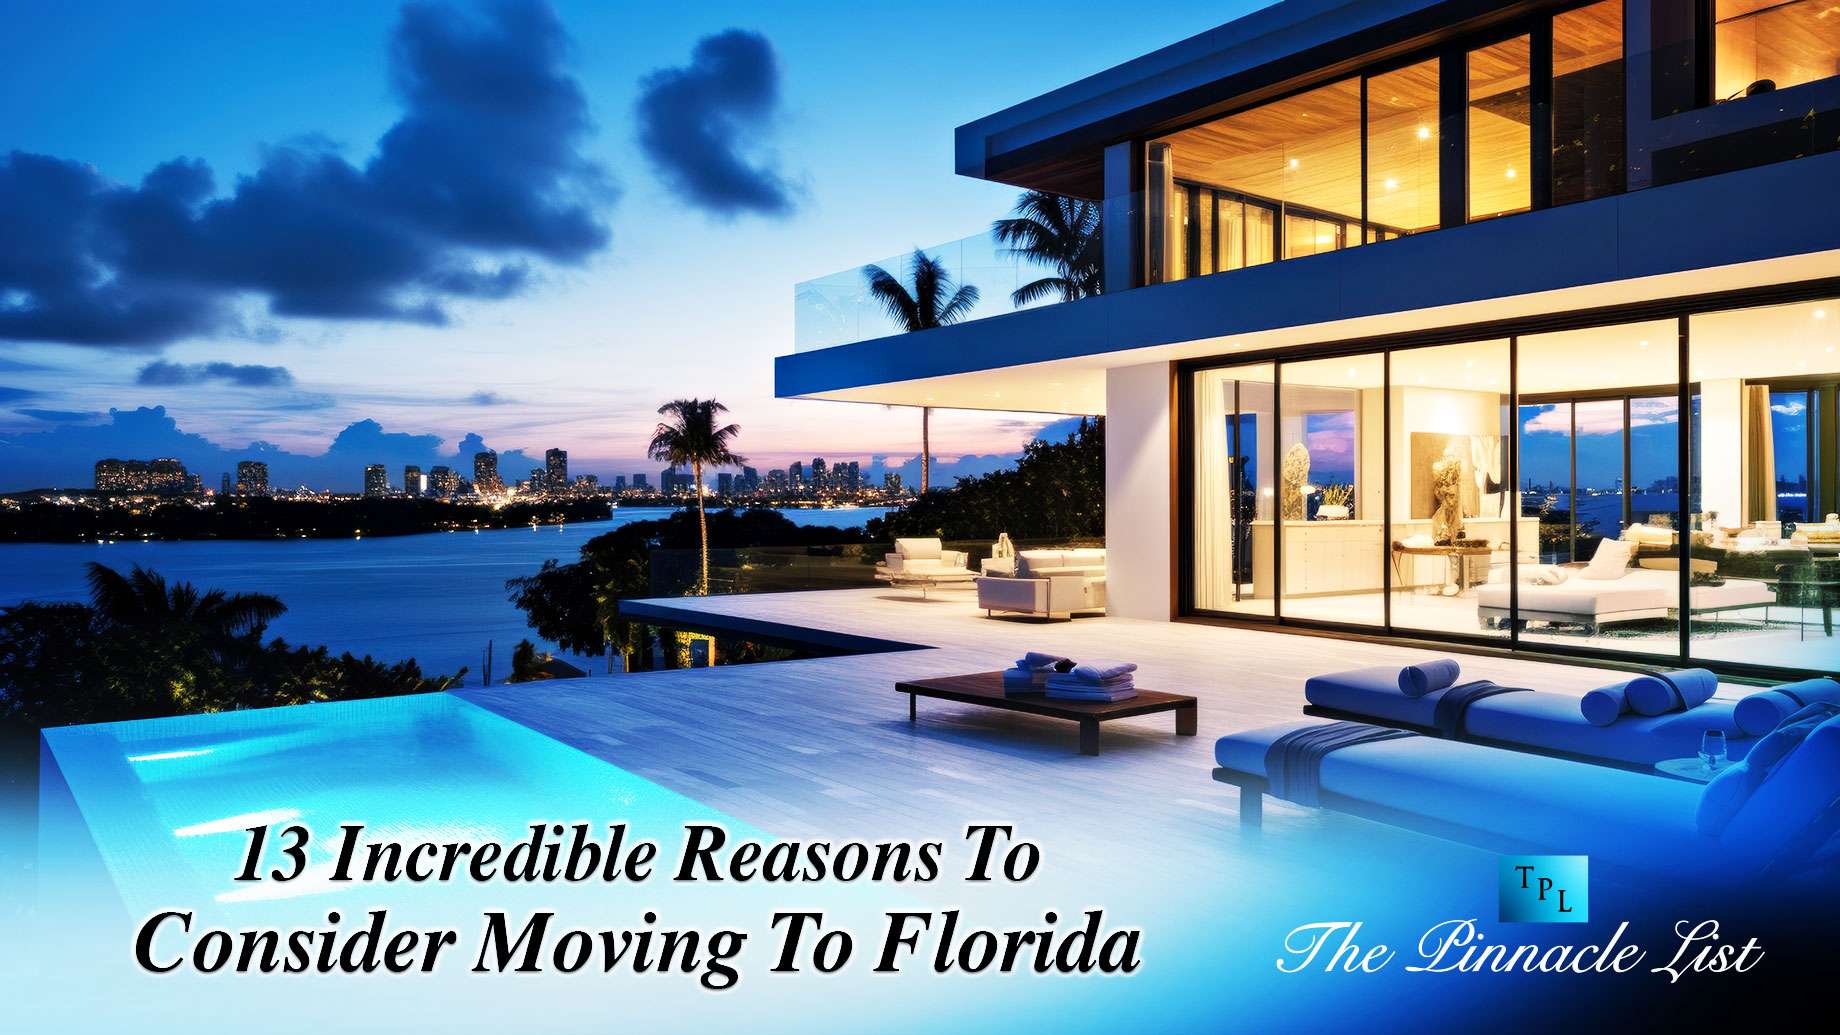 13 Incredible Reasons To Consider Moving To Florida